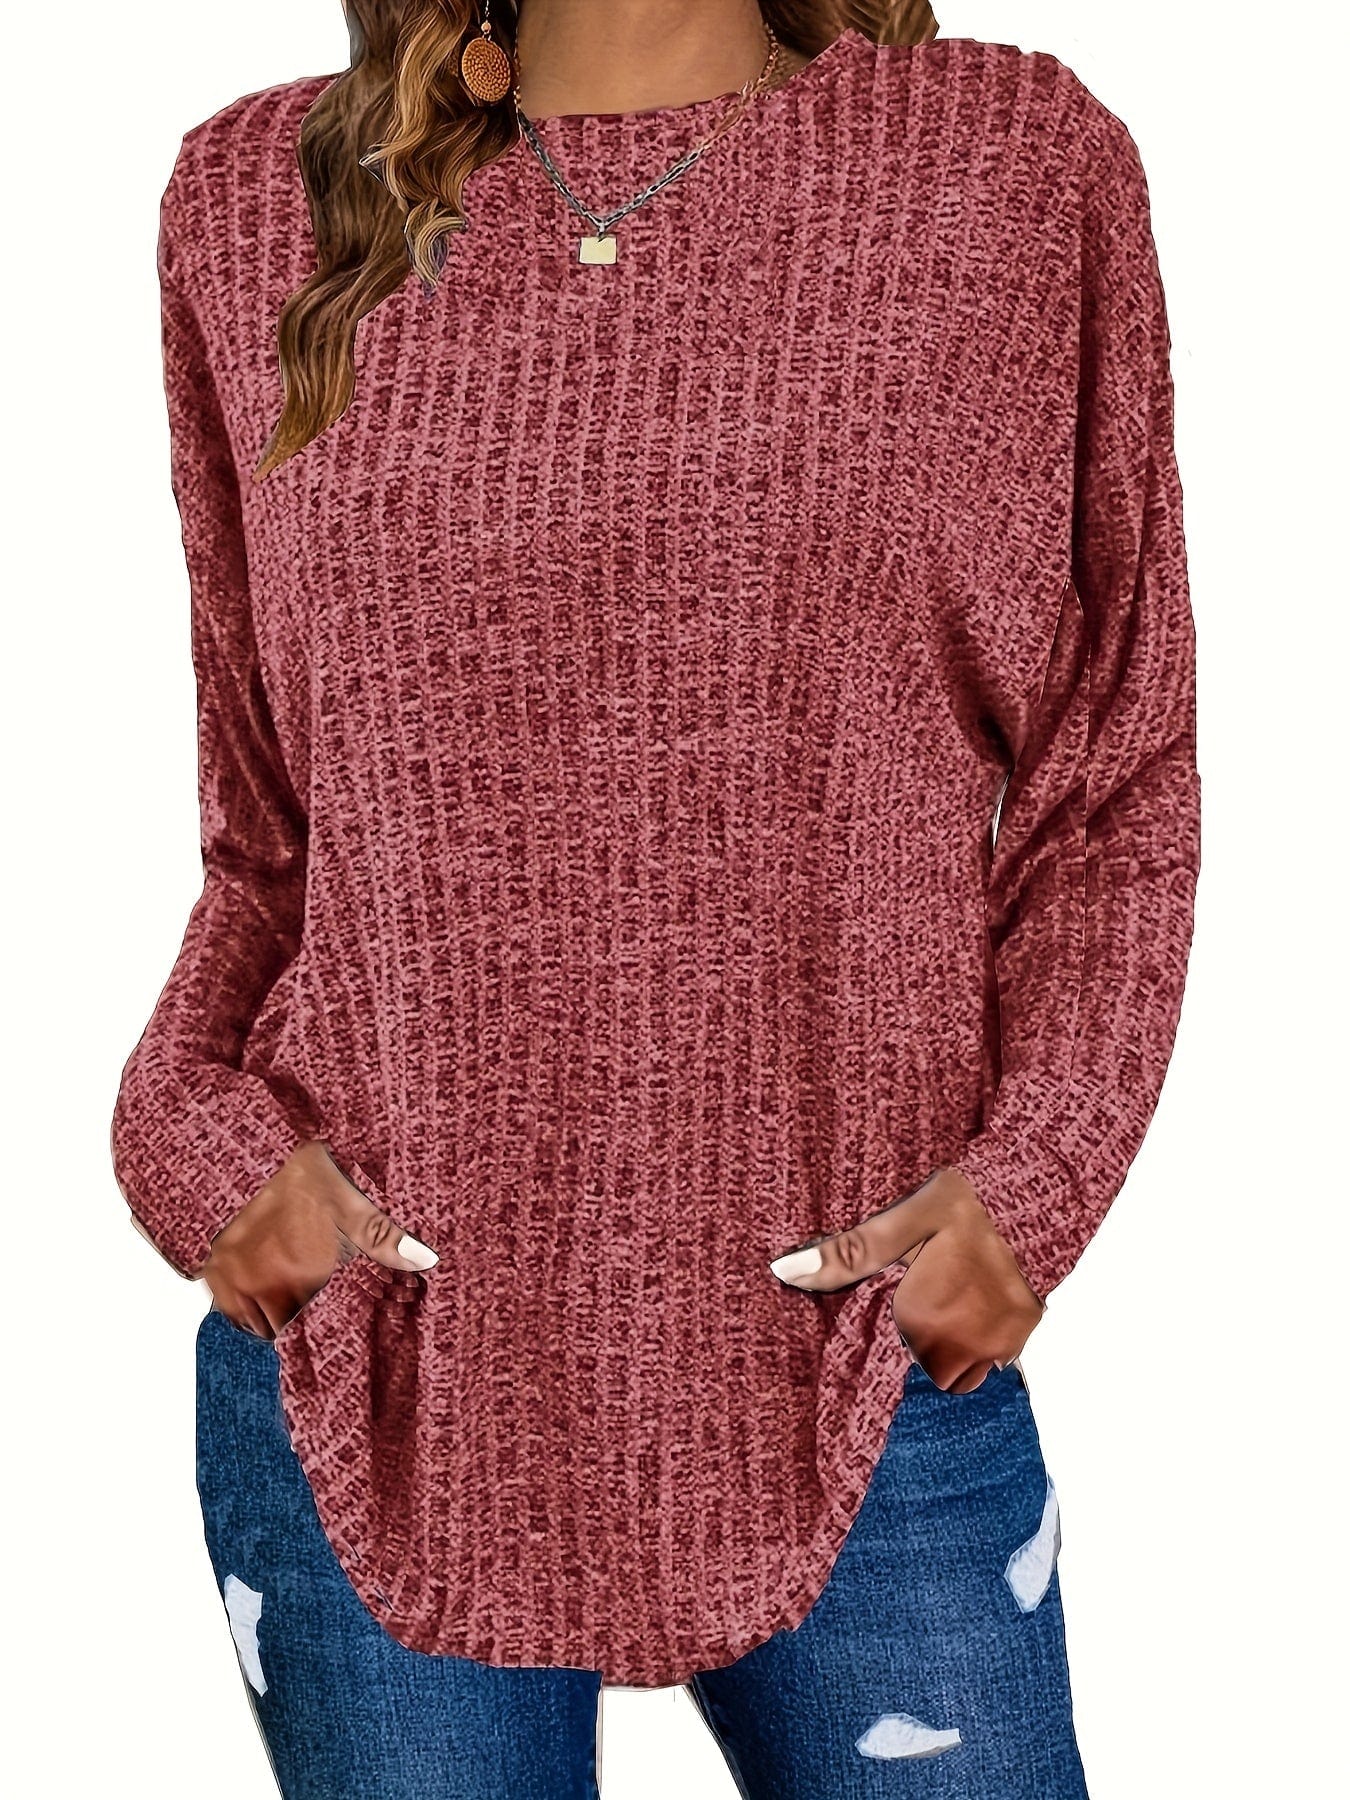 Plus Size Casual Sweater, Women's Plus Solid Ribbed Long Sleeve Round Neck Knit Top PLU2309A1617RDOPlus 1XL(14/16) DarkRed / Plus 1XL(14/16)